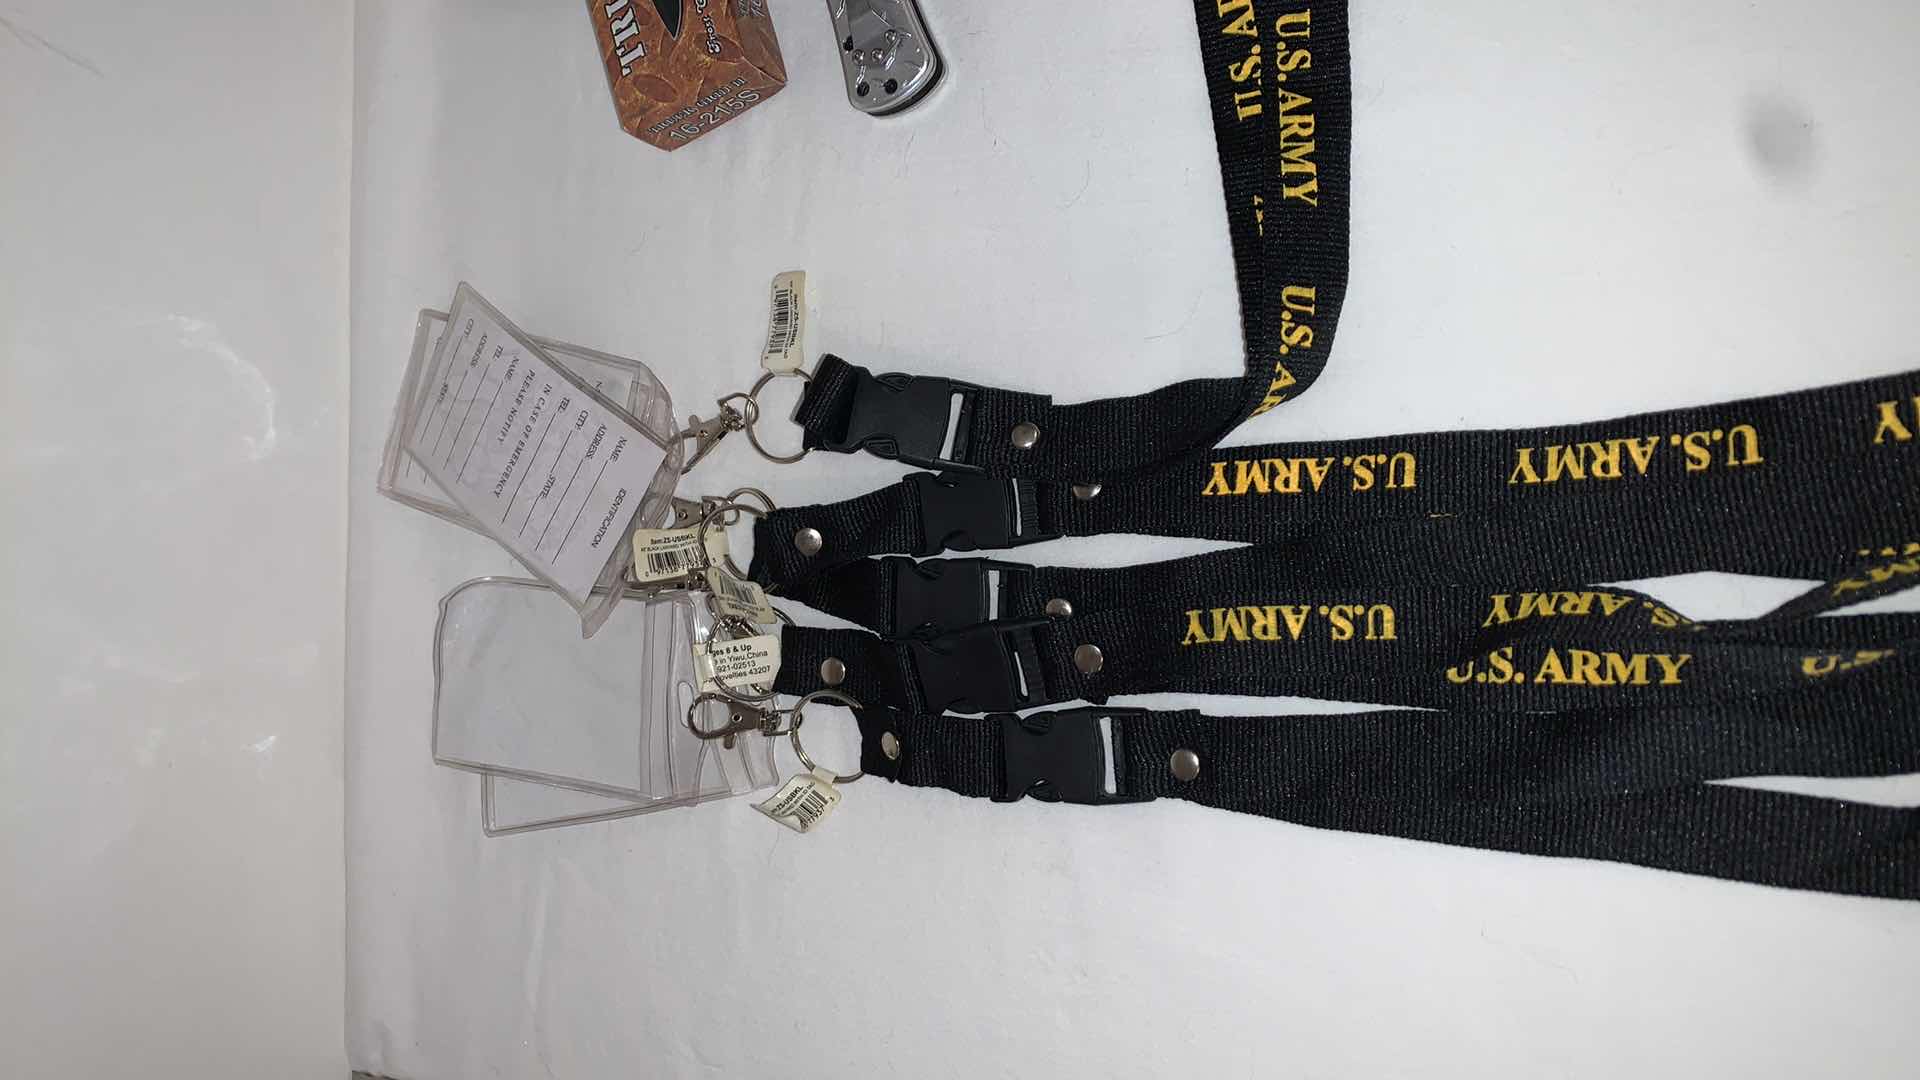 Photo 2 of SET OF U.S. ARMY LANYARDS AND TRUCK GRID II KNIFE